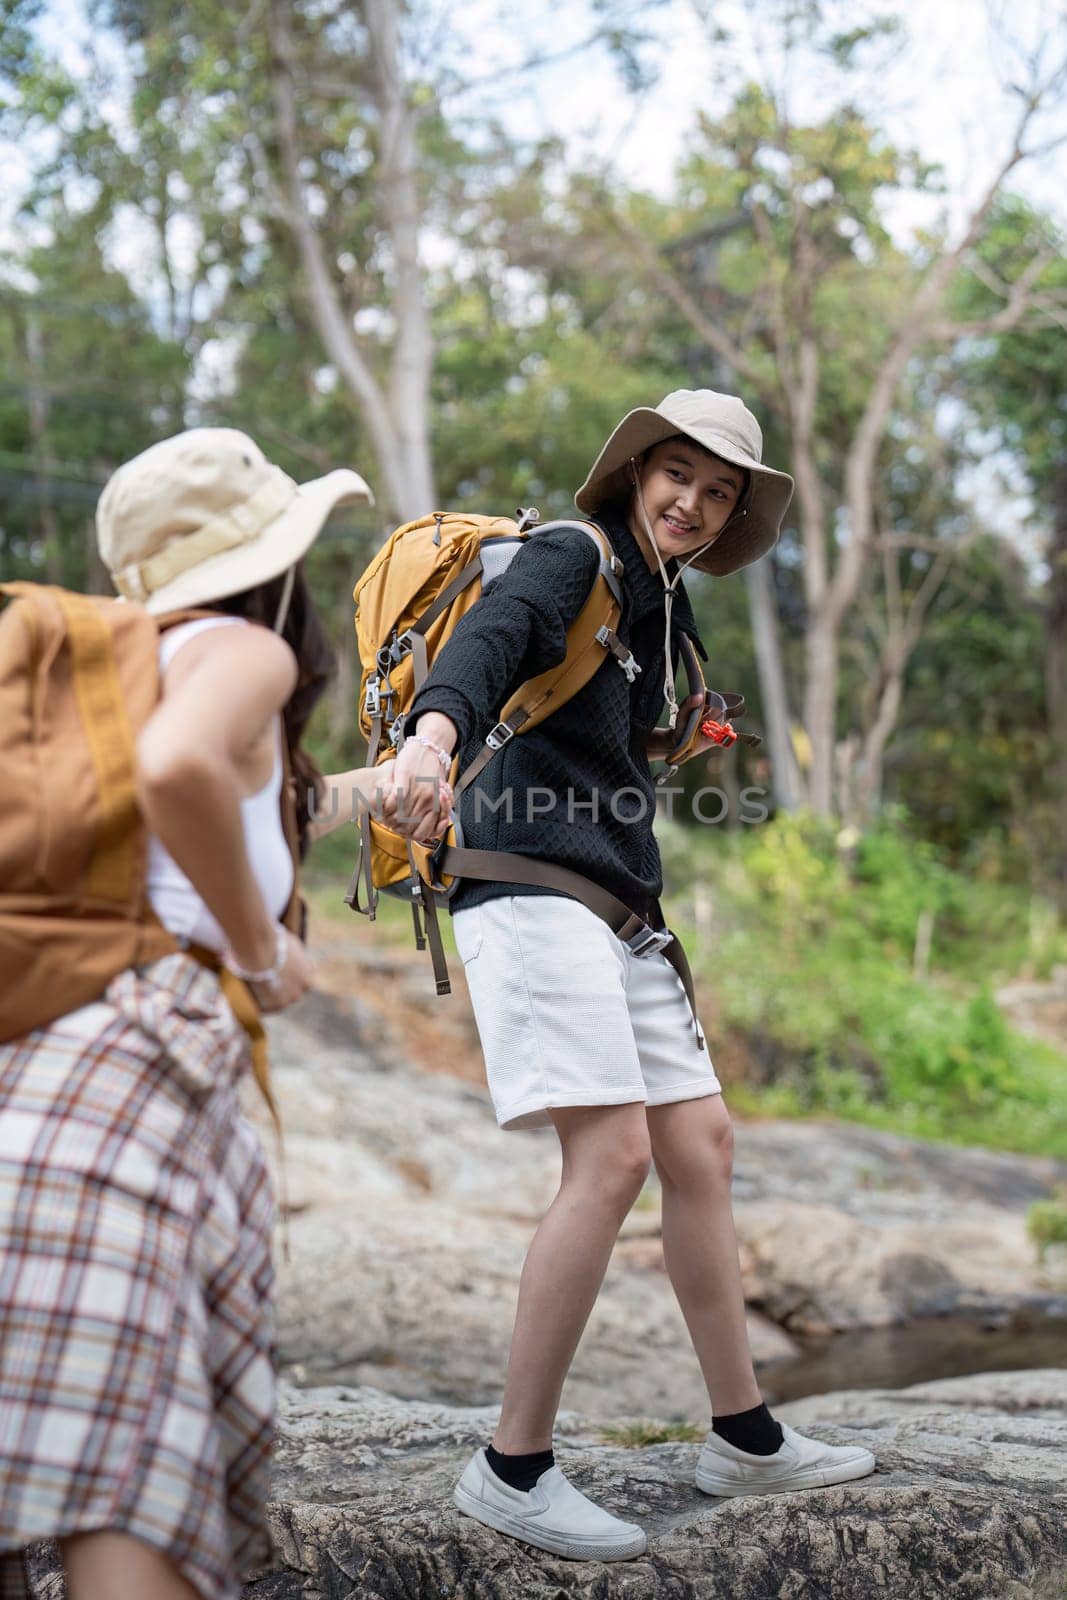 Lovely couple lesbian woman with backpack hiking in nature. Loving LGBT romantic moment in mountains.